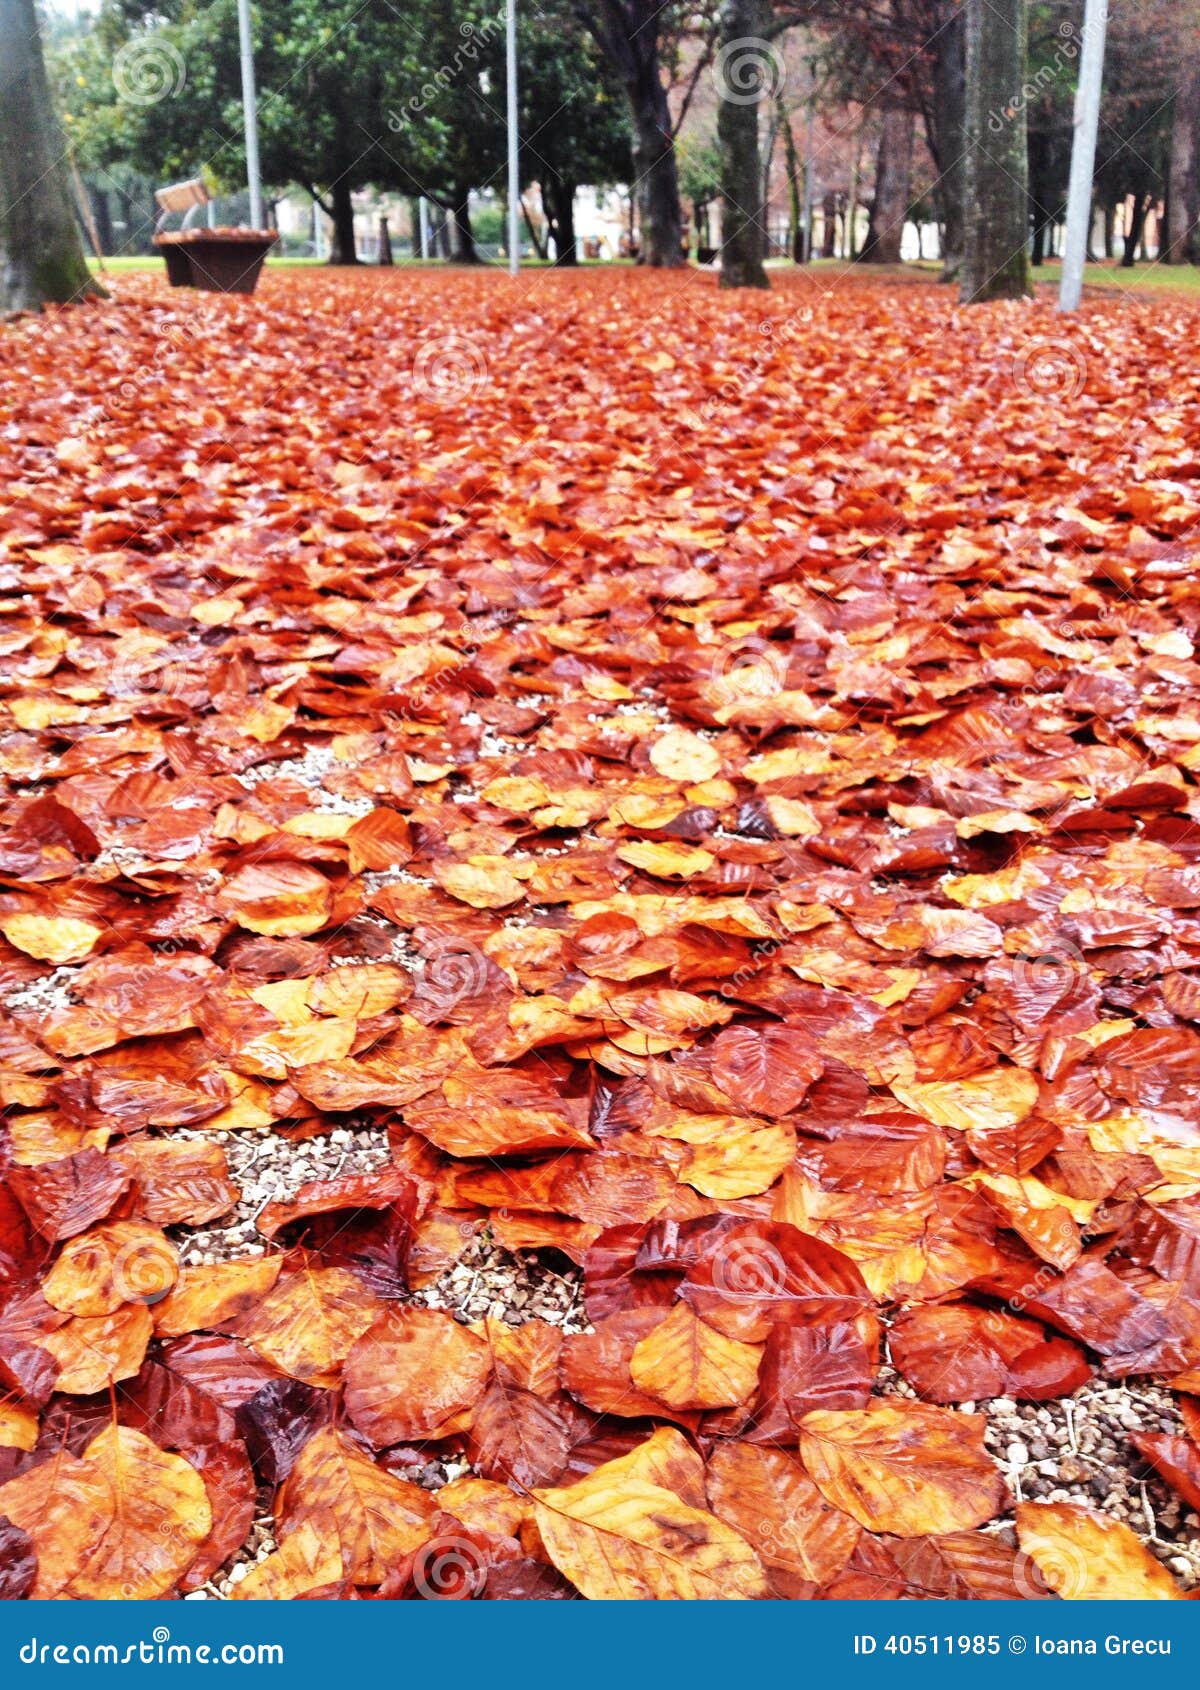 Colorful Autumn Leaves Carpet Stock Image - Image of close, colorful